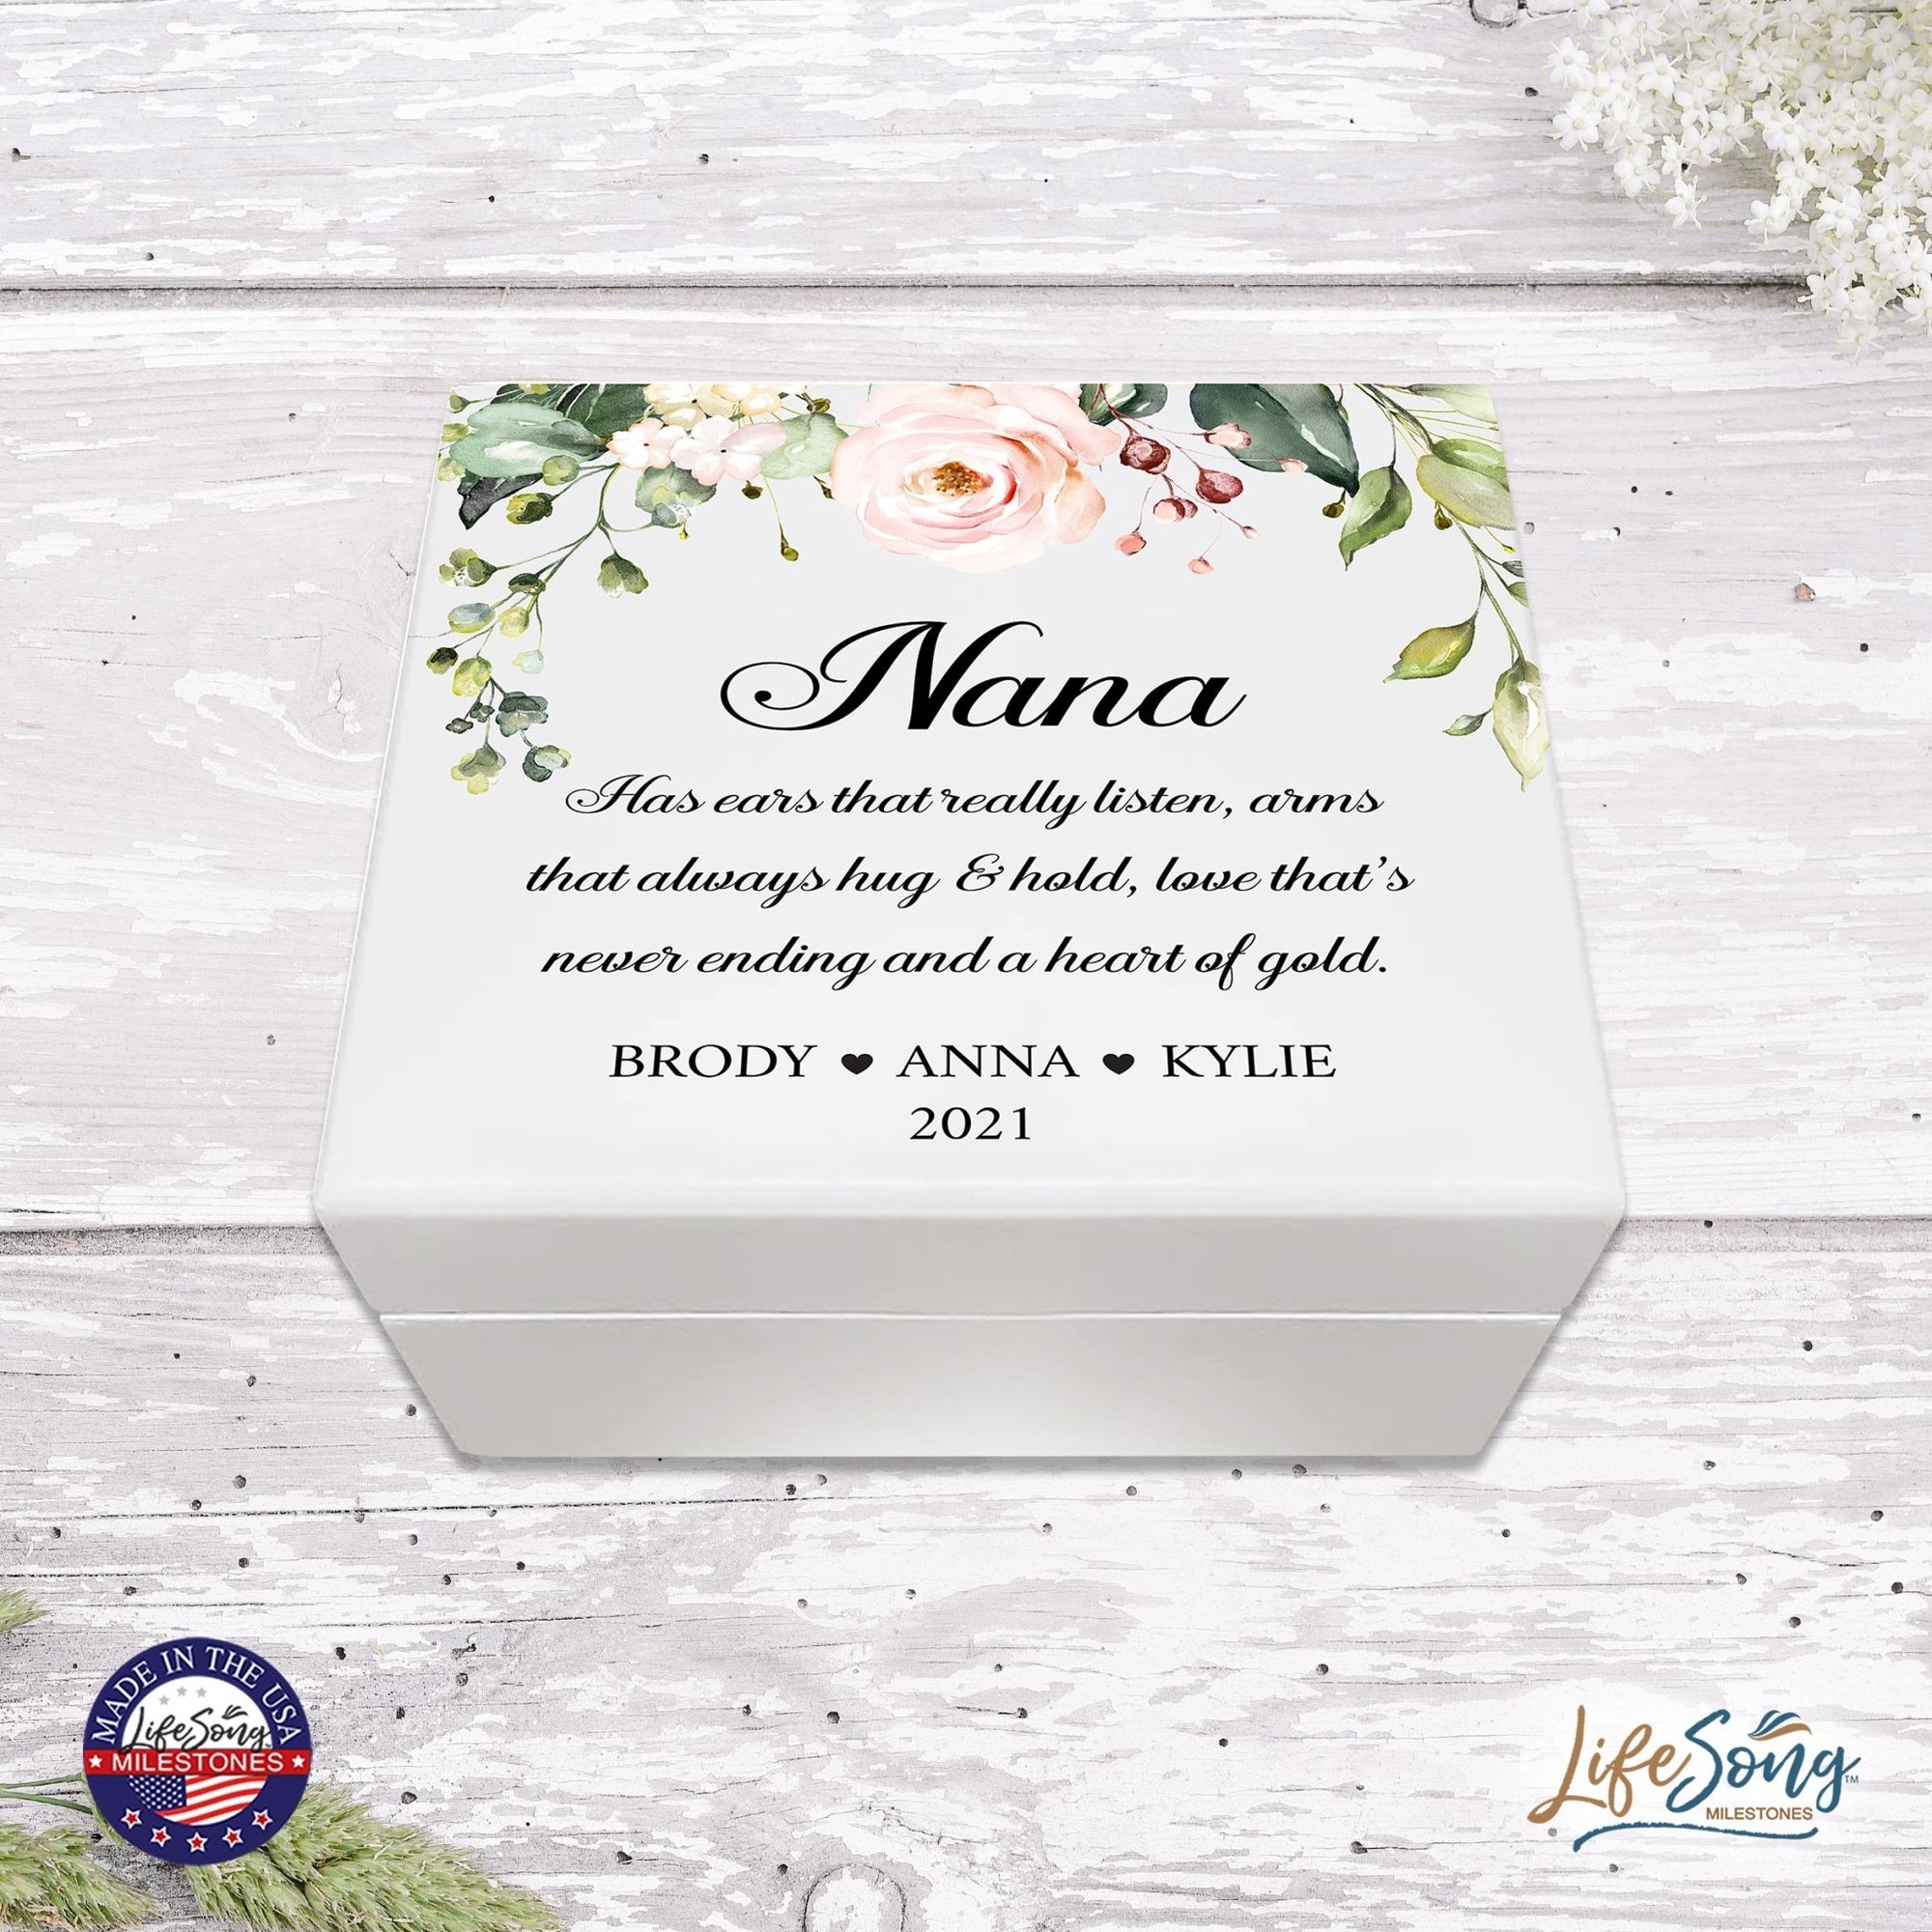 Personalized Nana’s White Keepsake Box 6x5.5 with Inspirational verse - A Heart Of Gold - LifeSong Milestones